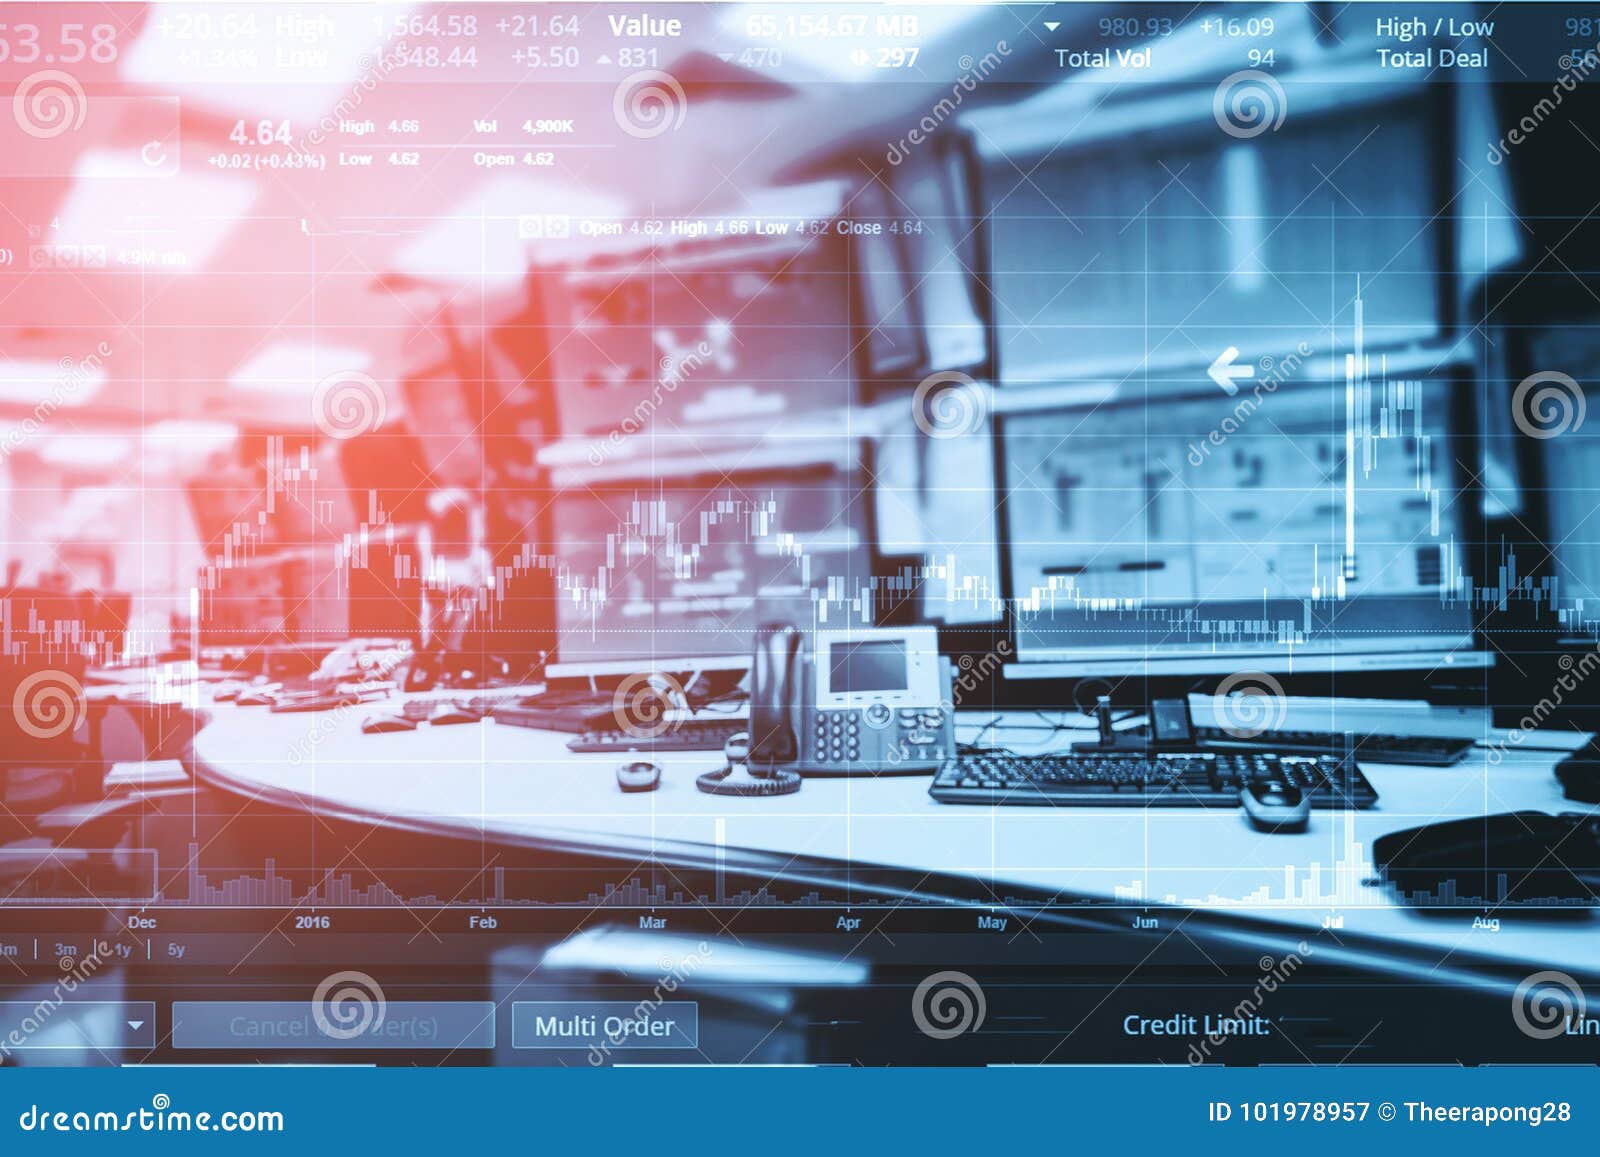 Double Exposure of Business Stock Trading Room with Computer and Stock